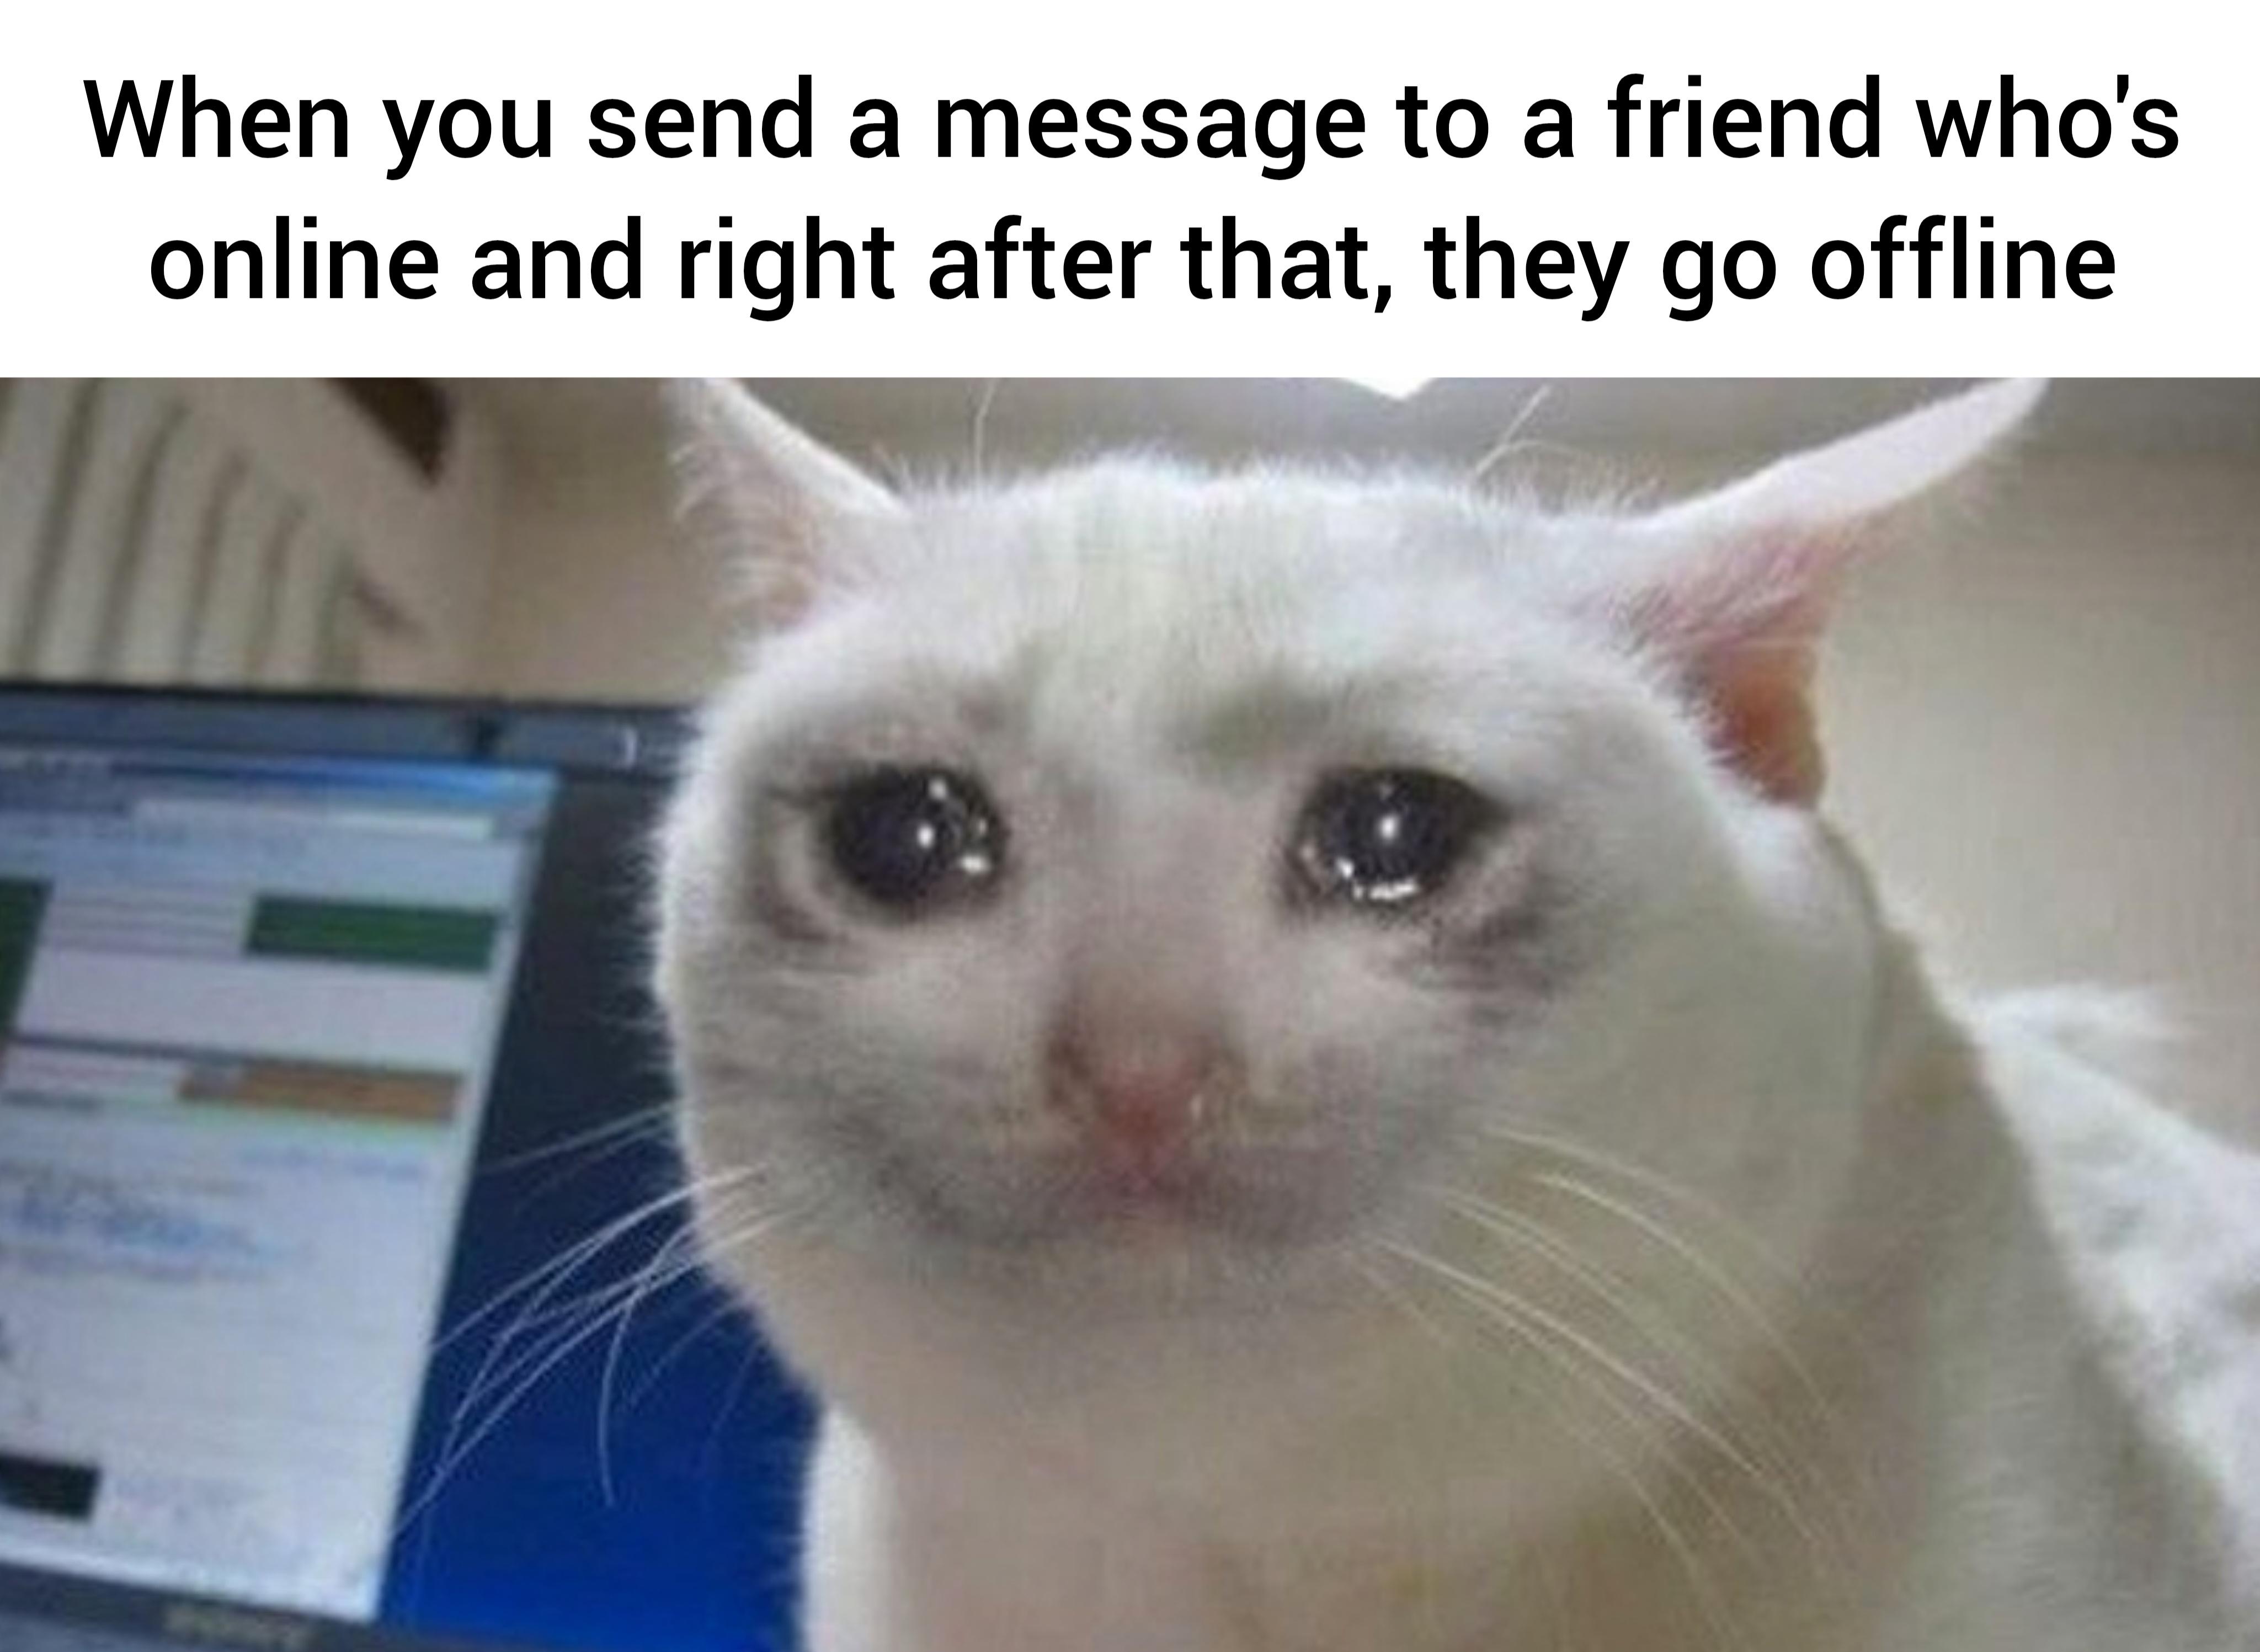 gaming memes for all - photo caption - When you send a message to a friend who's online and right after that, they go offline